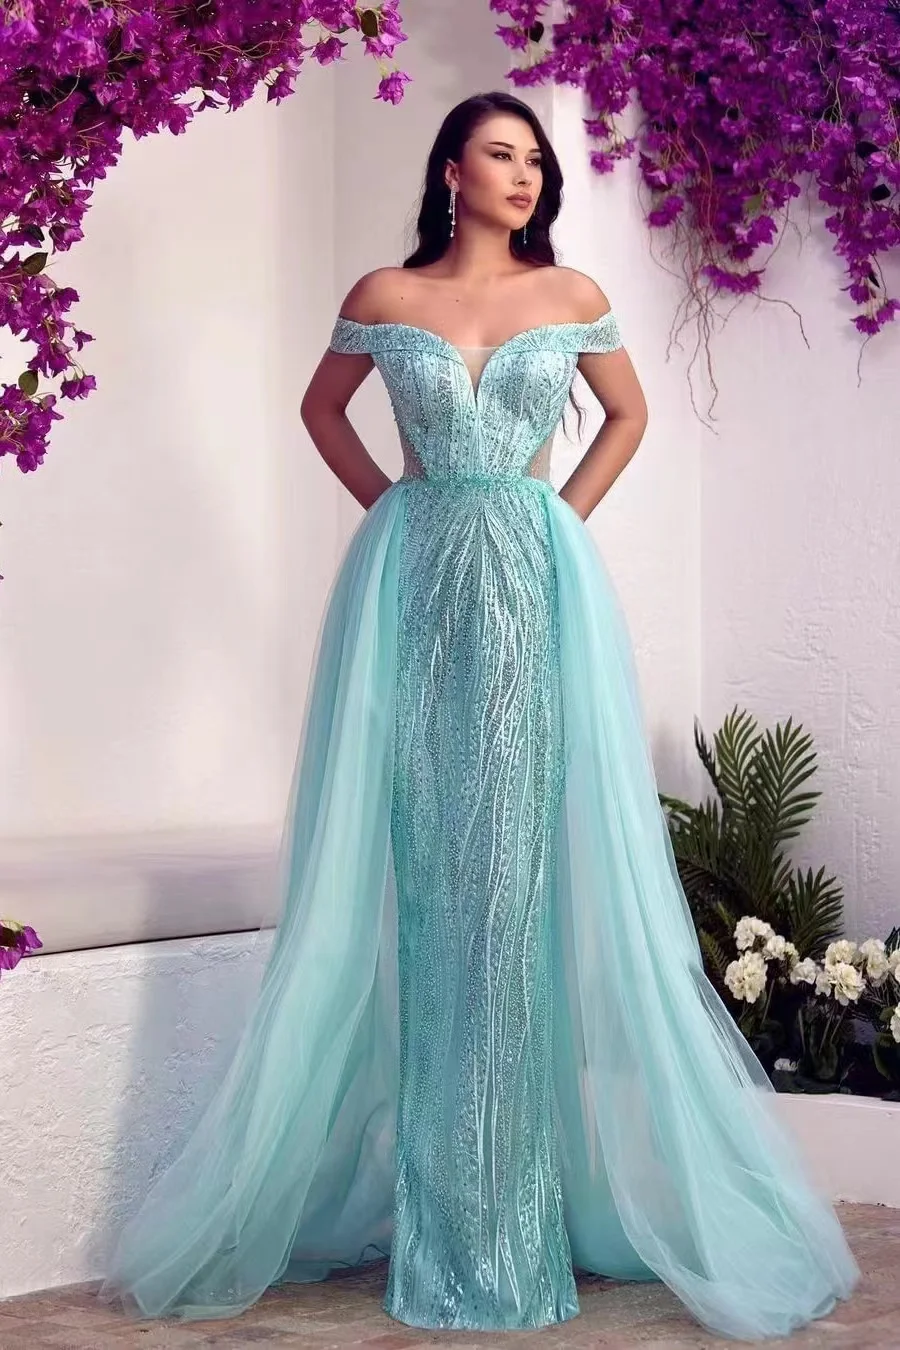 Daisda Glamorous Off-The-Shoulder Sweetheart Tulle Prom Dress Overskirt With Sequins Beads